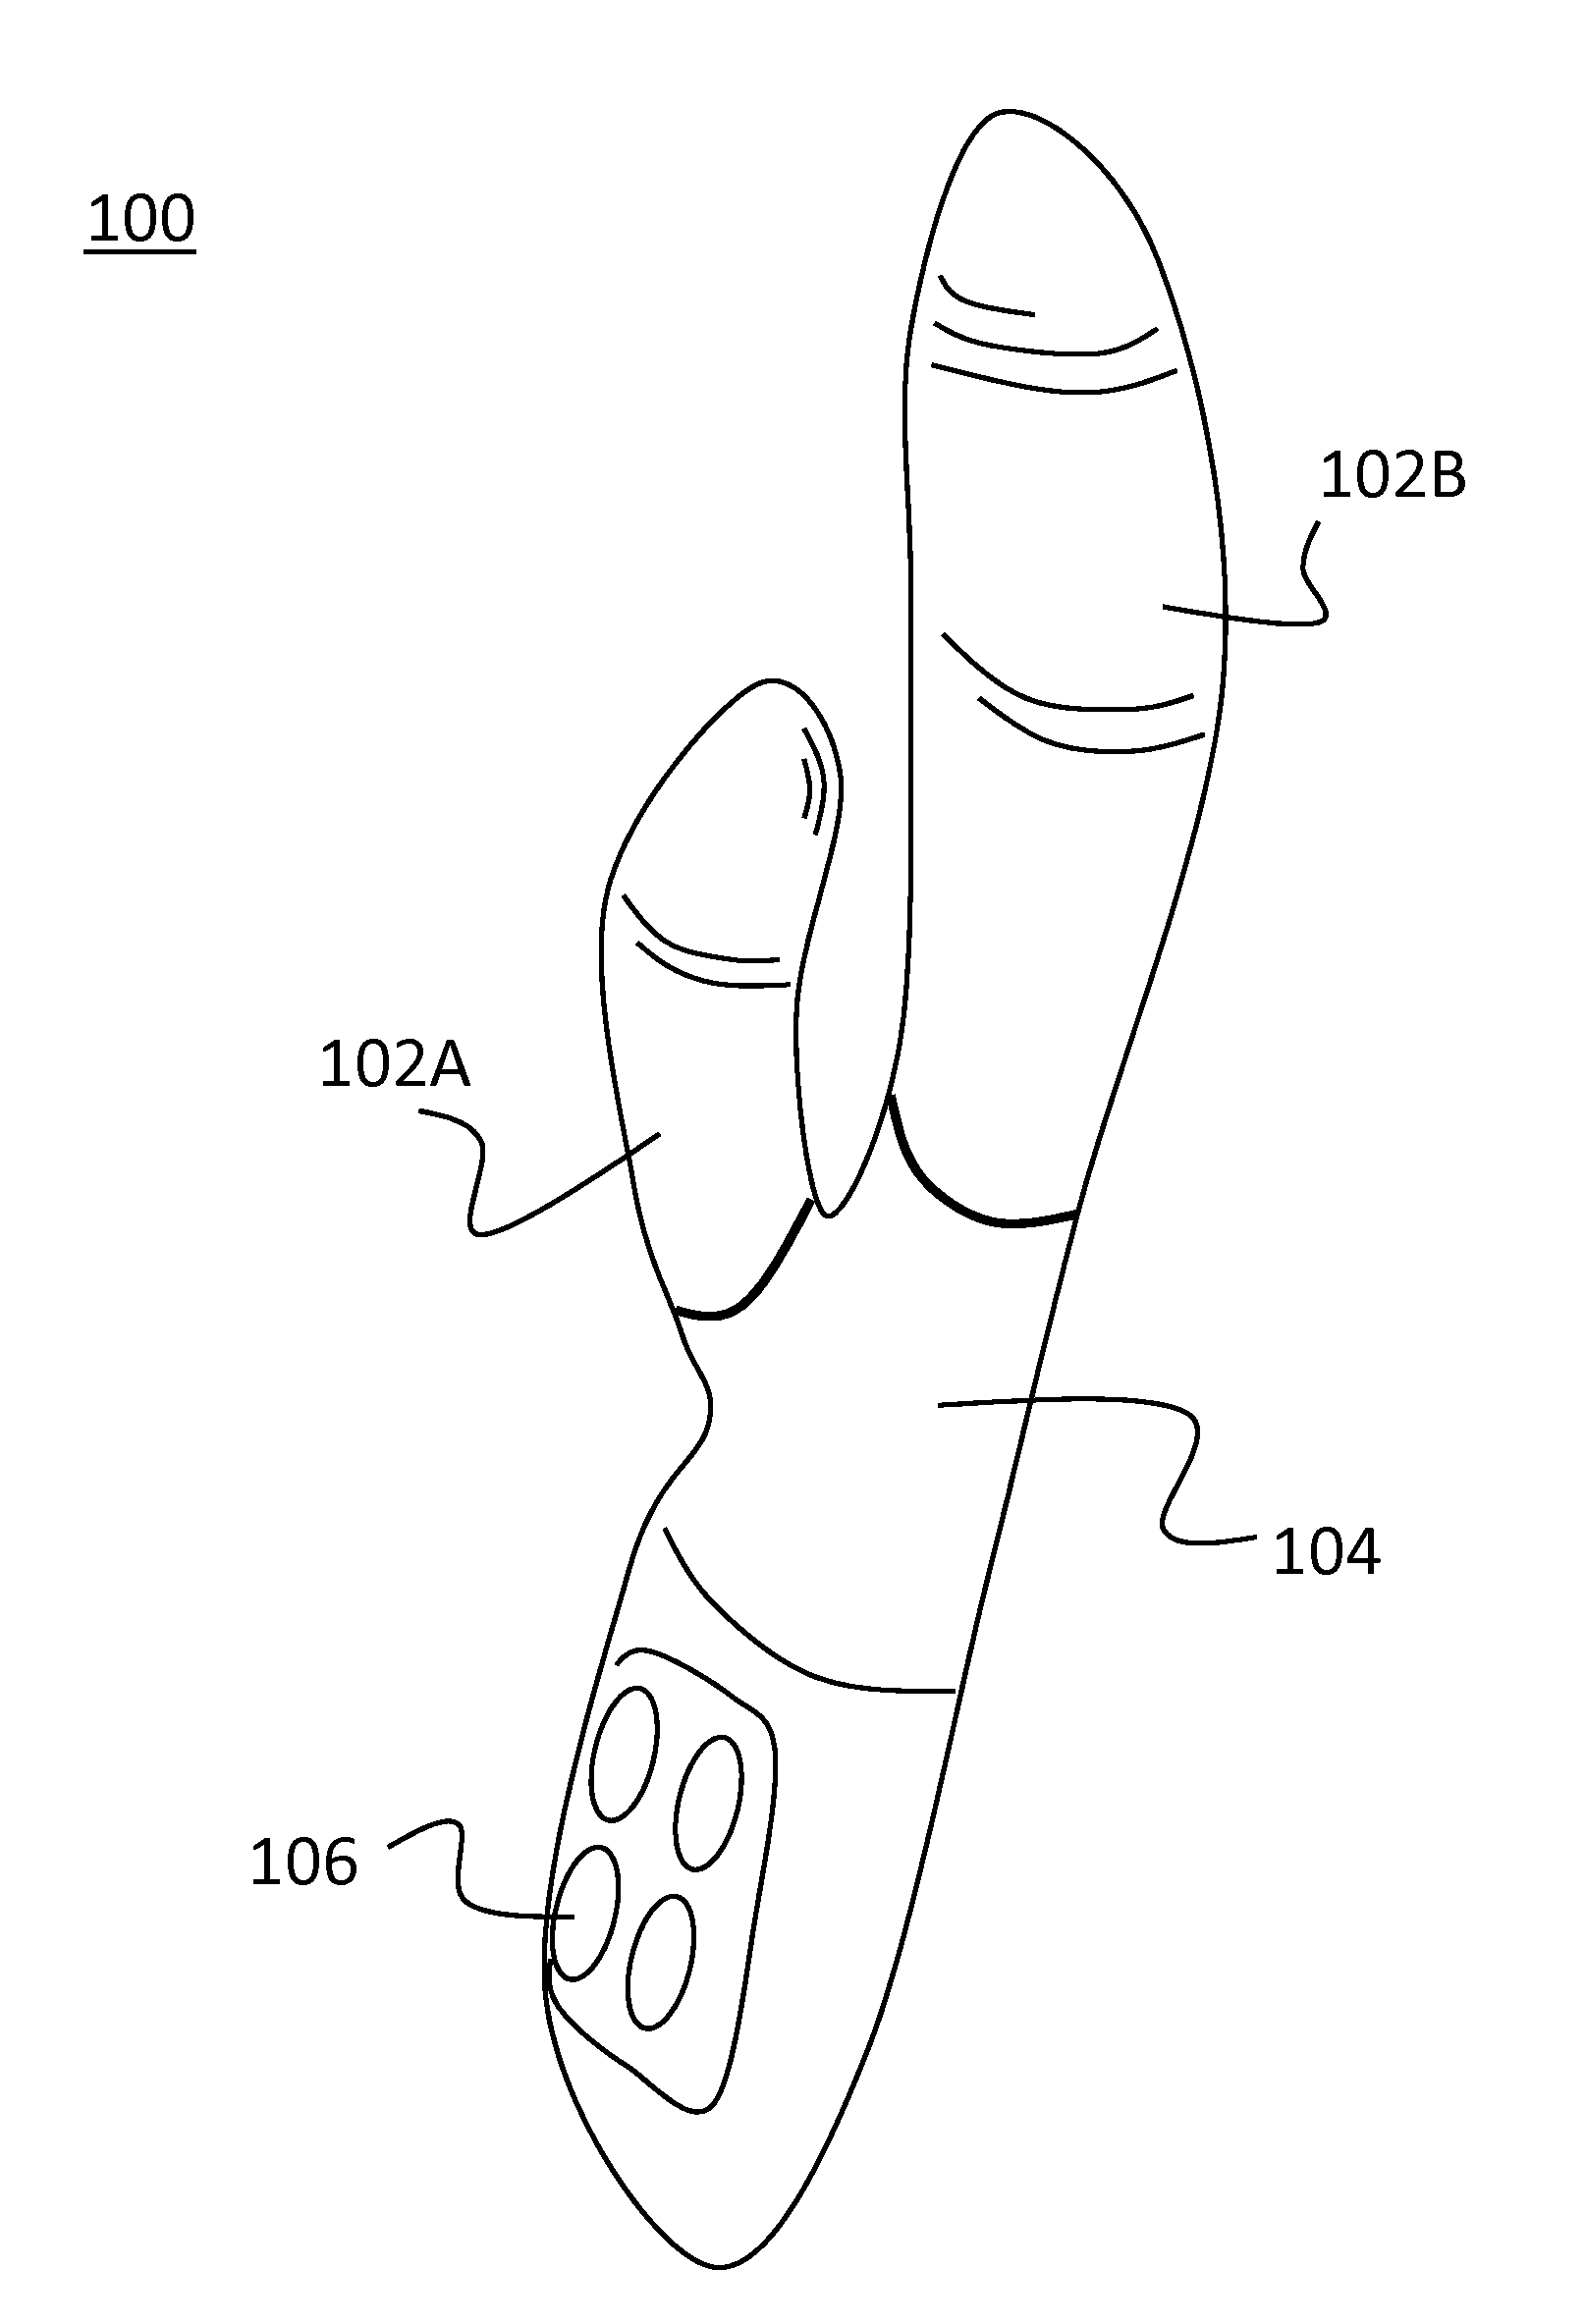 Sexual stimulation device with interchangeable sheaths